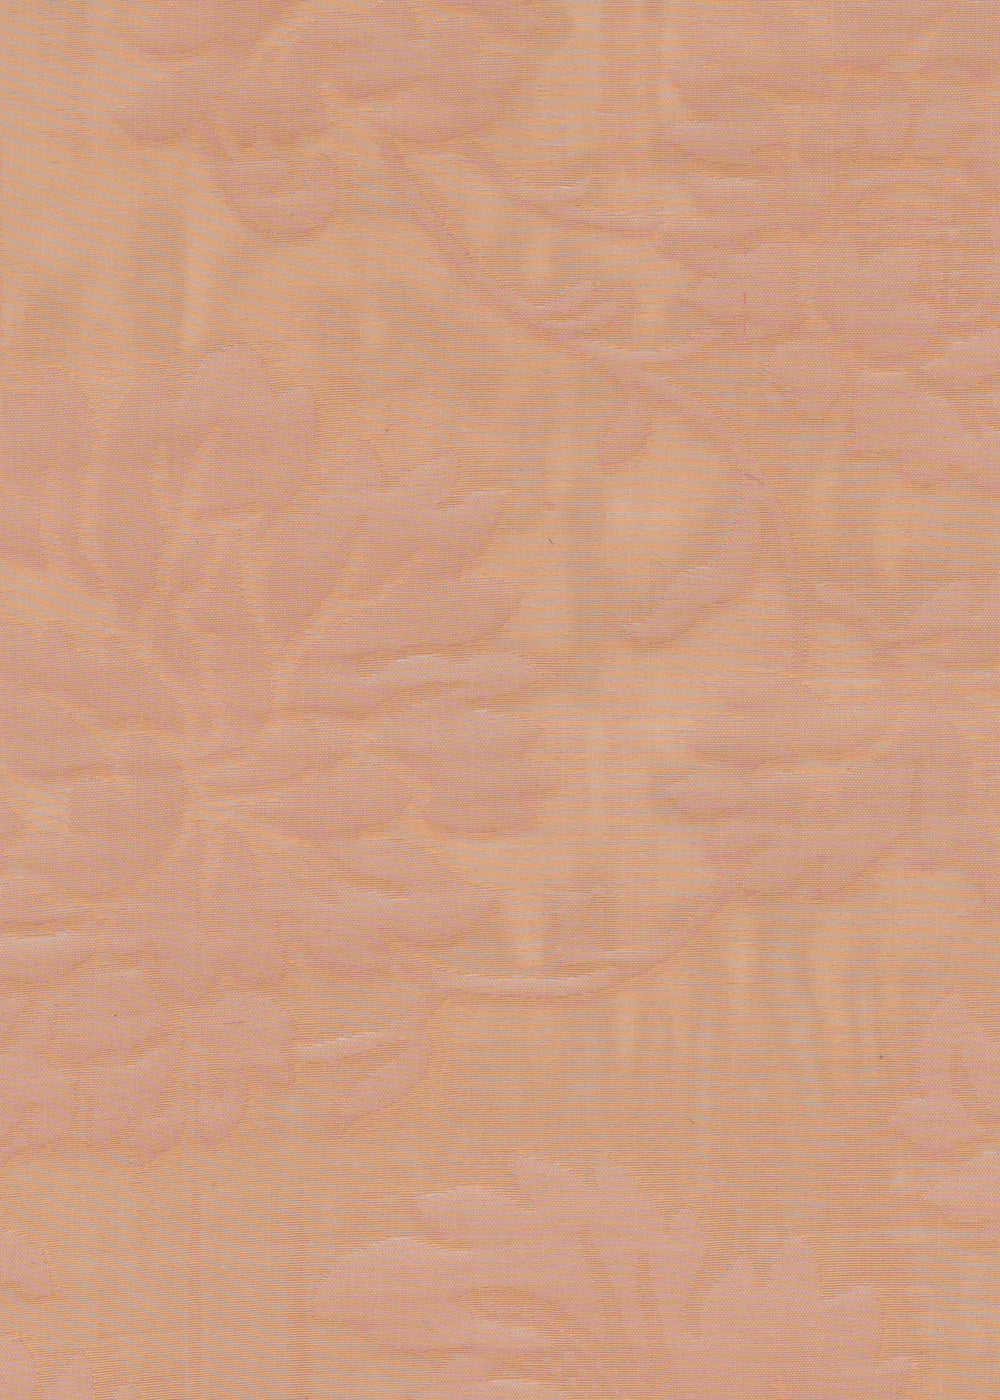 salmon pink woven damask fabric for drapery